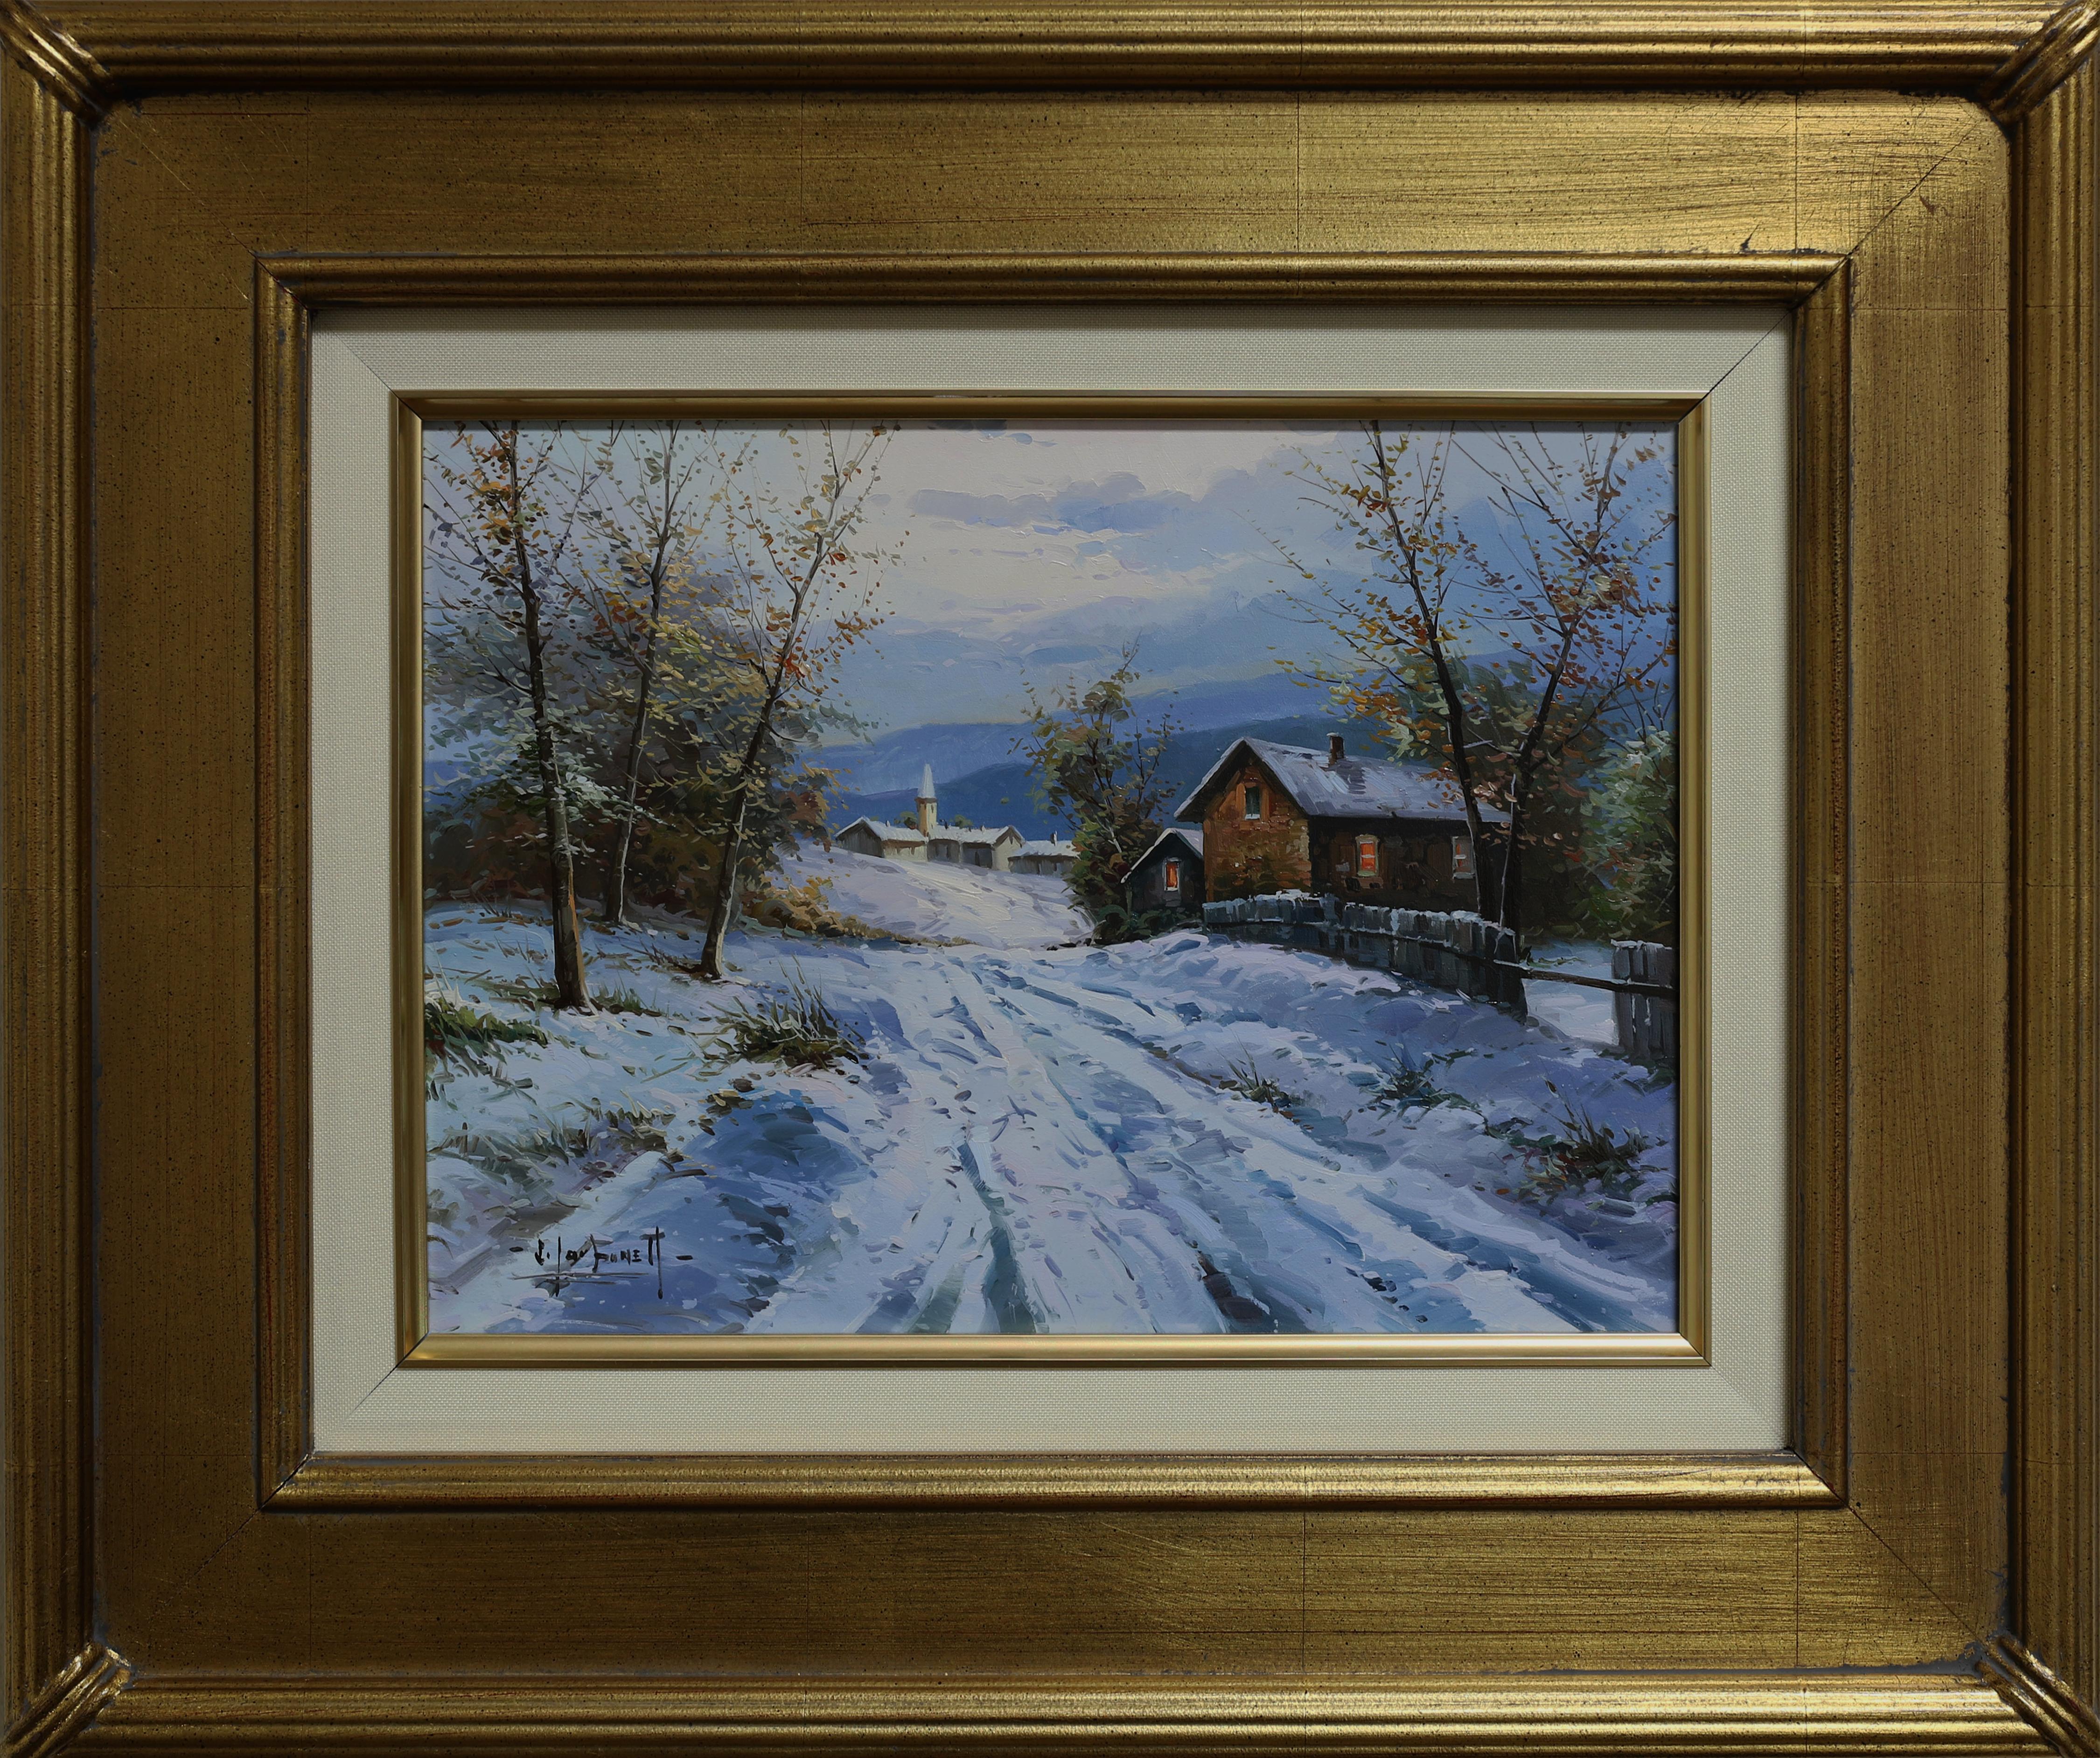 Item is in excellent condition and has only been displayed in a gallery setting. Item includes frame; framed dimensions are approximately 17 x 20.5 inches.

Jorge Carbonell was born in Alcoy (Alicante), Spain on August 19th 1950, and was born into a